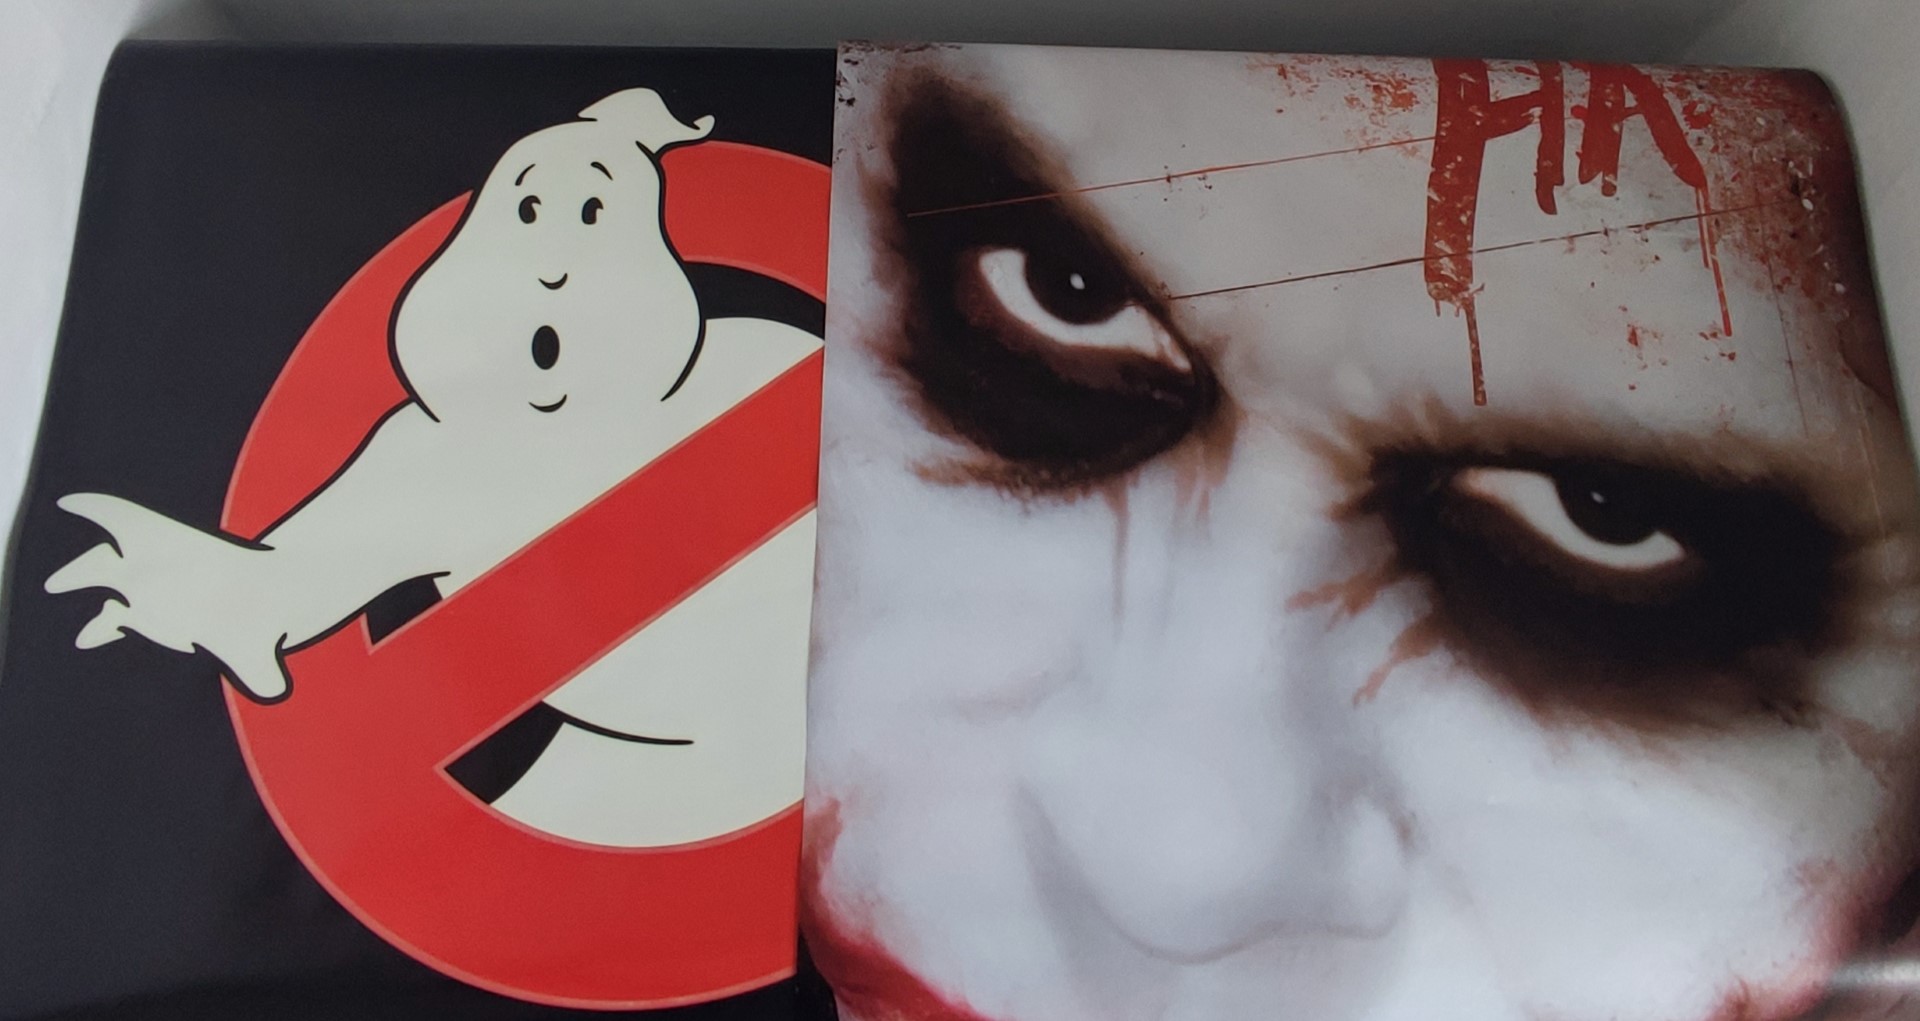 Reservoir Dogs, Ghostbusters and Batman The Dark Knight posters, - Image 2 of 3